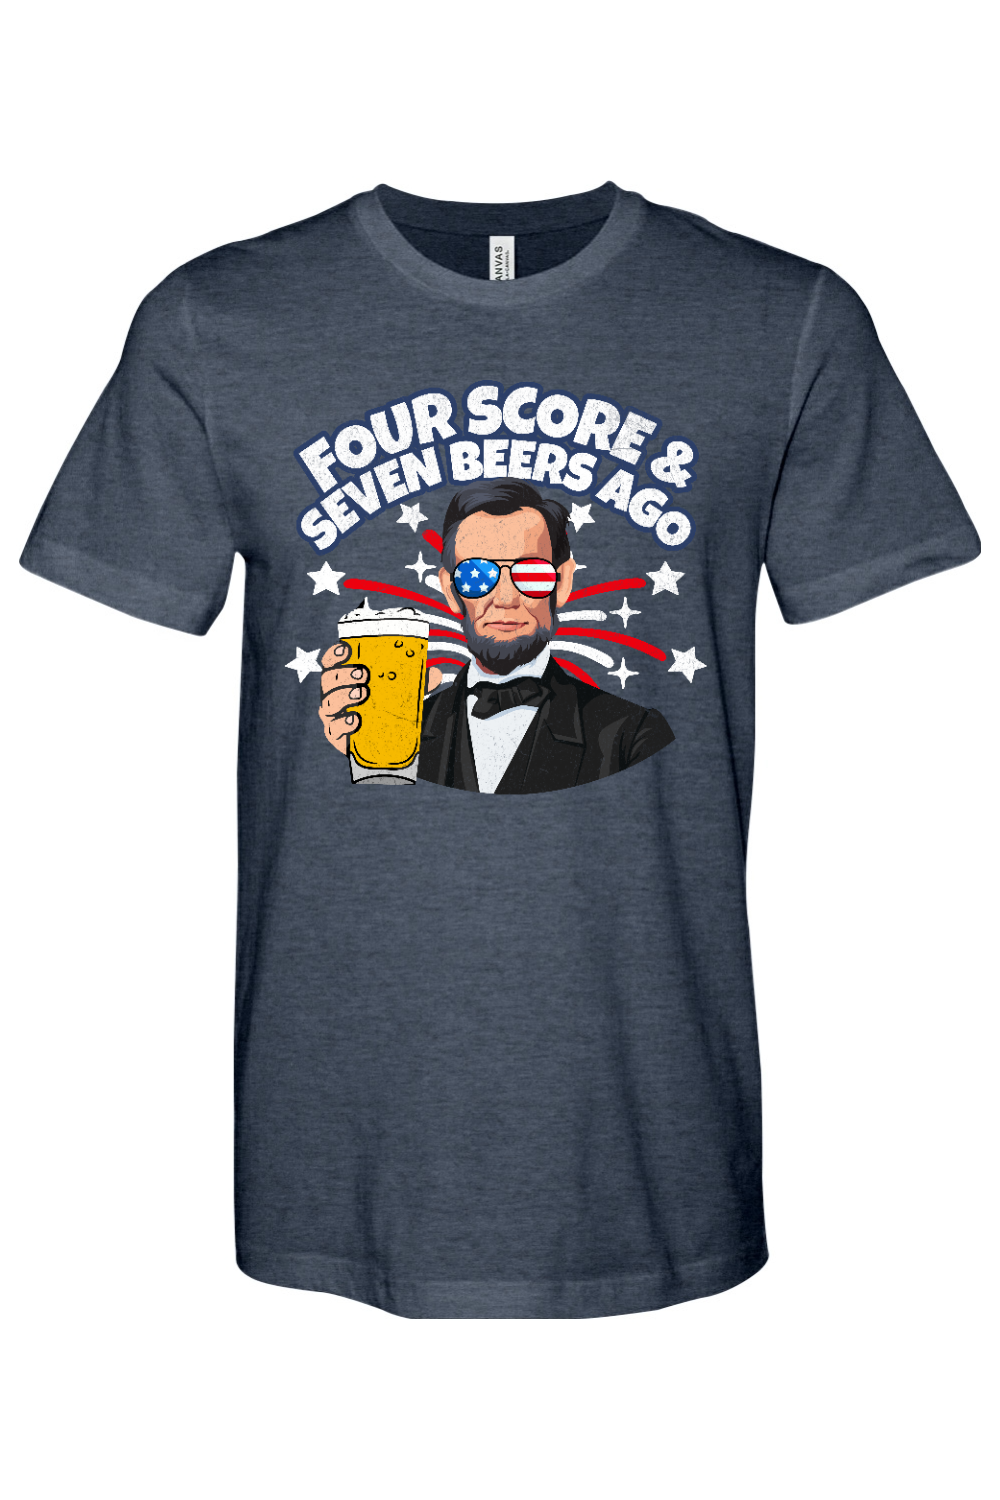 Four Score and Seven Beers Ago - Yinzylvania